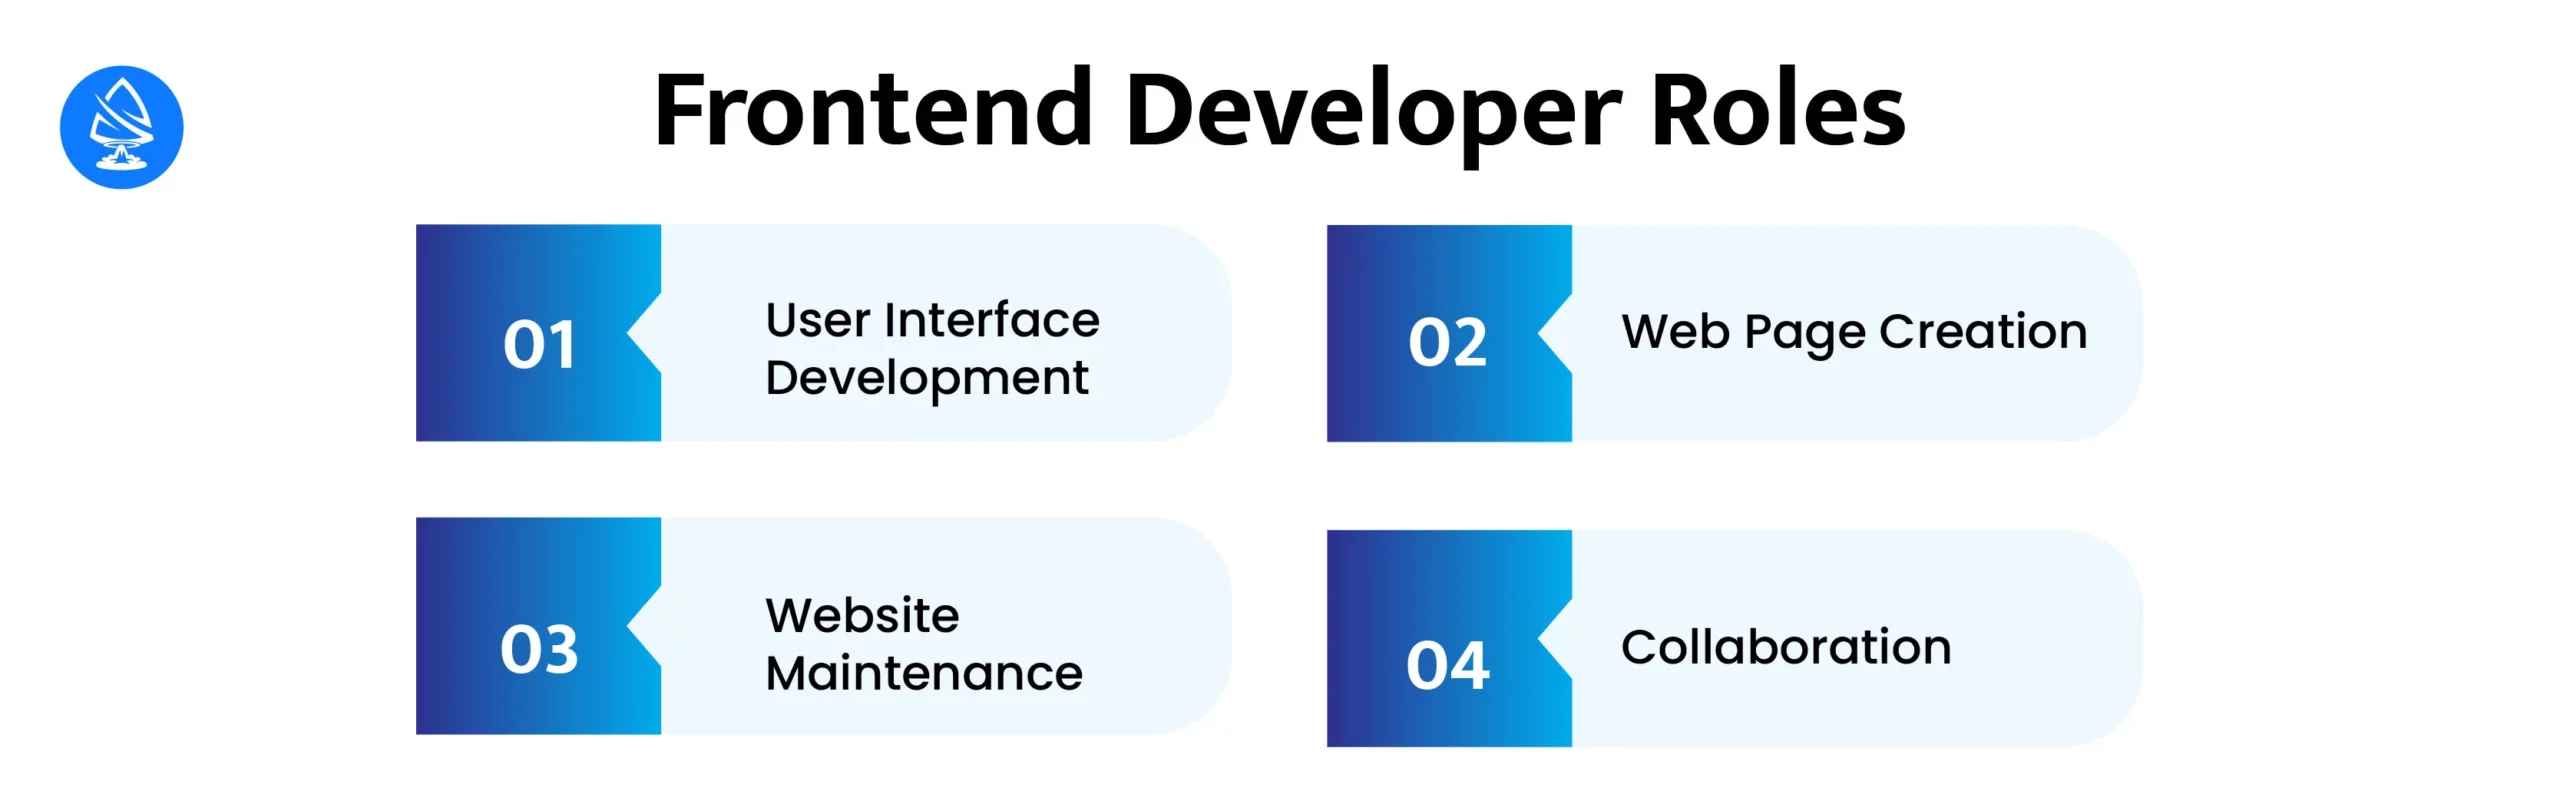 Frontend Developer Roles and Responsibilities